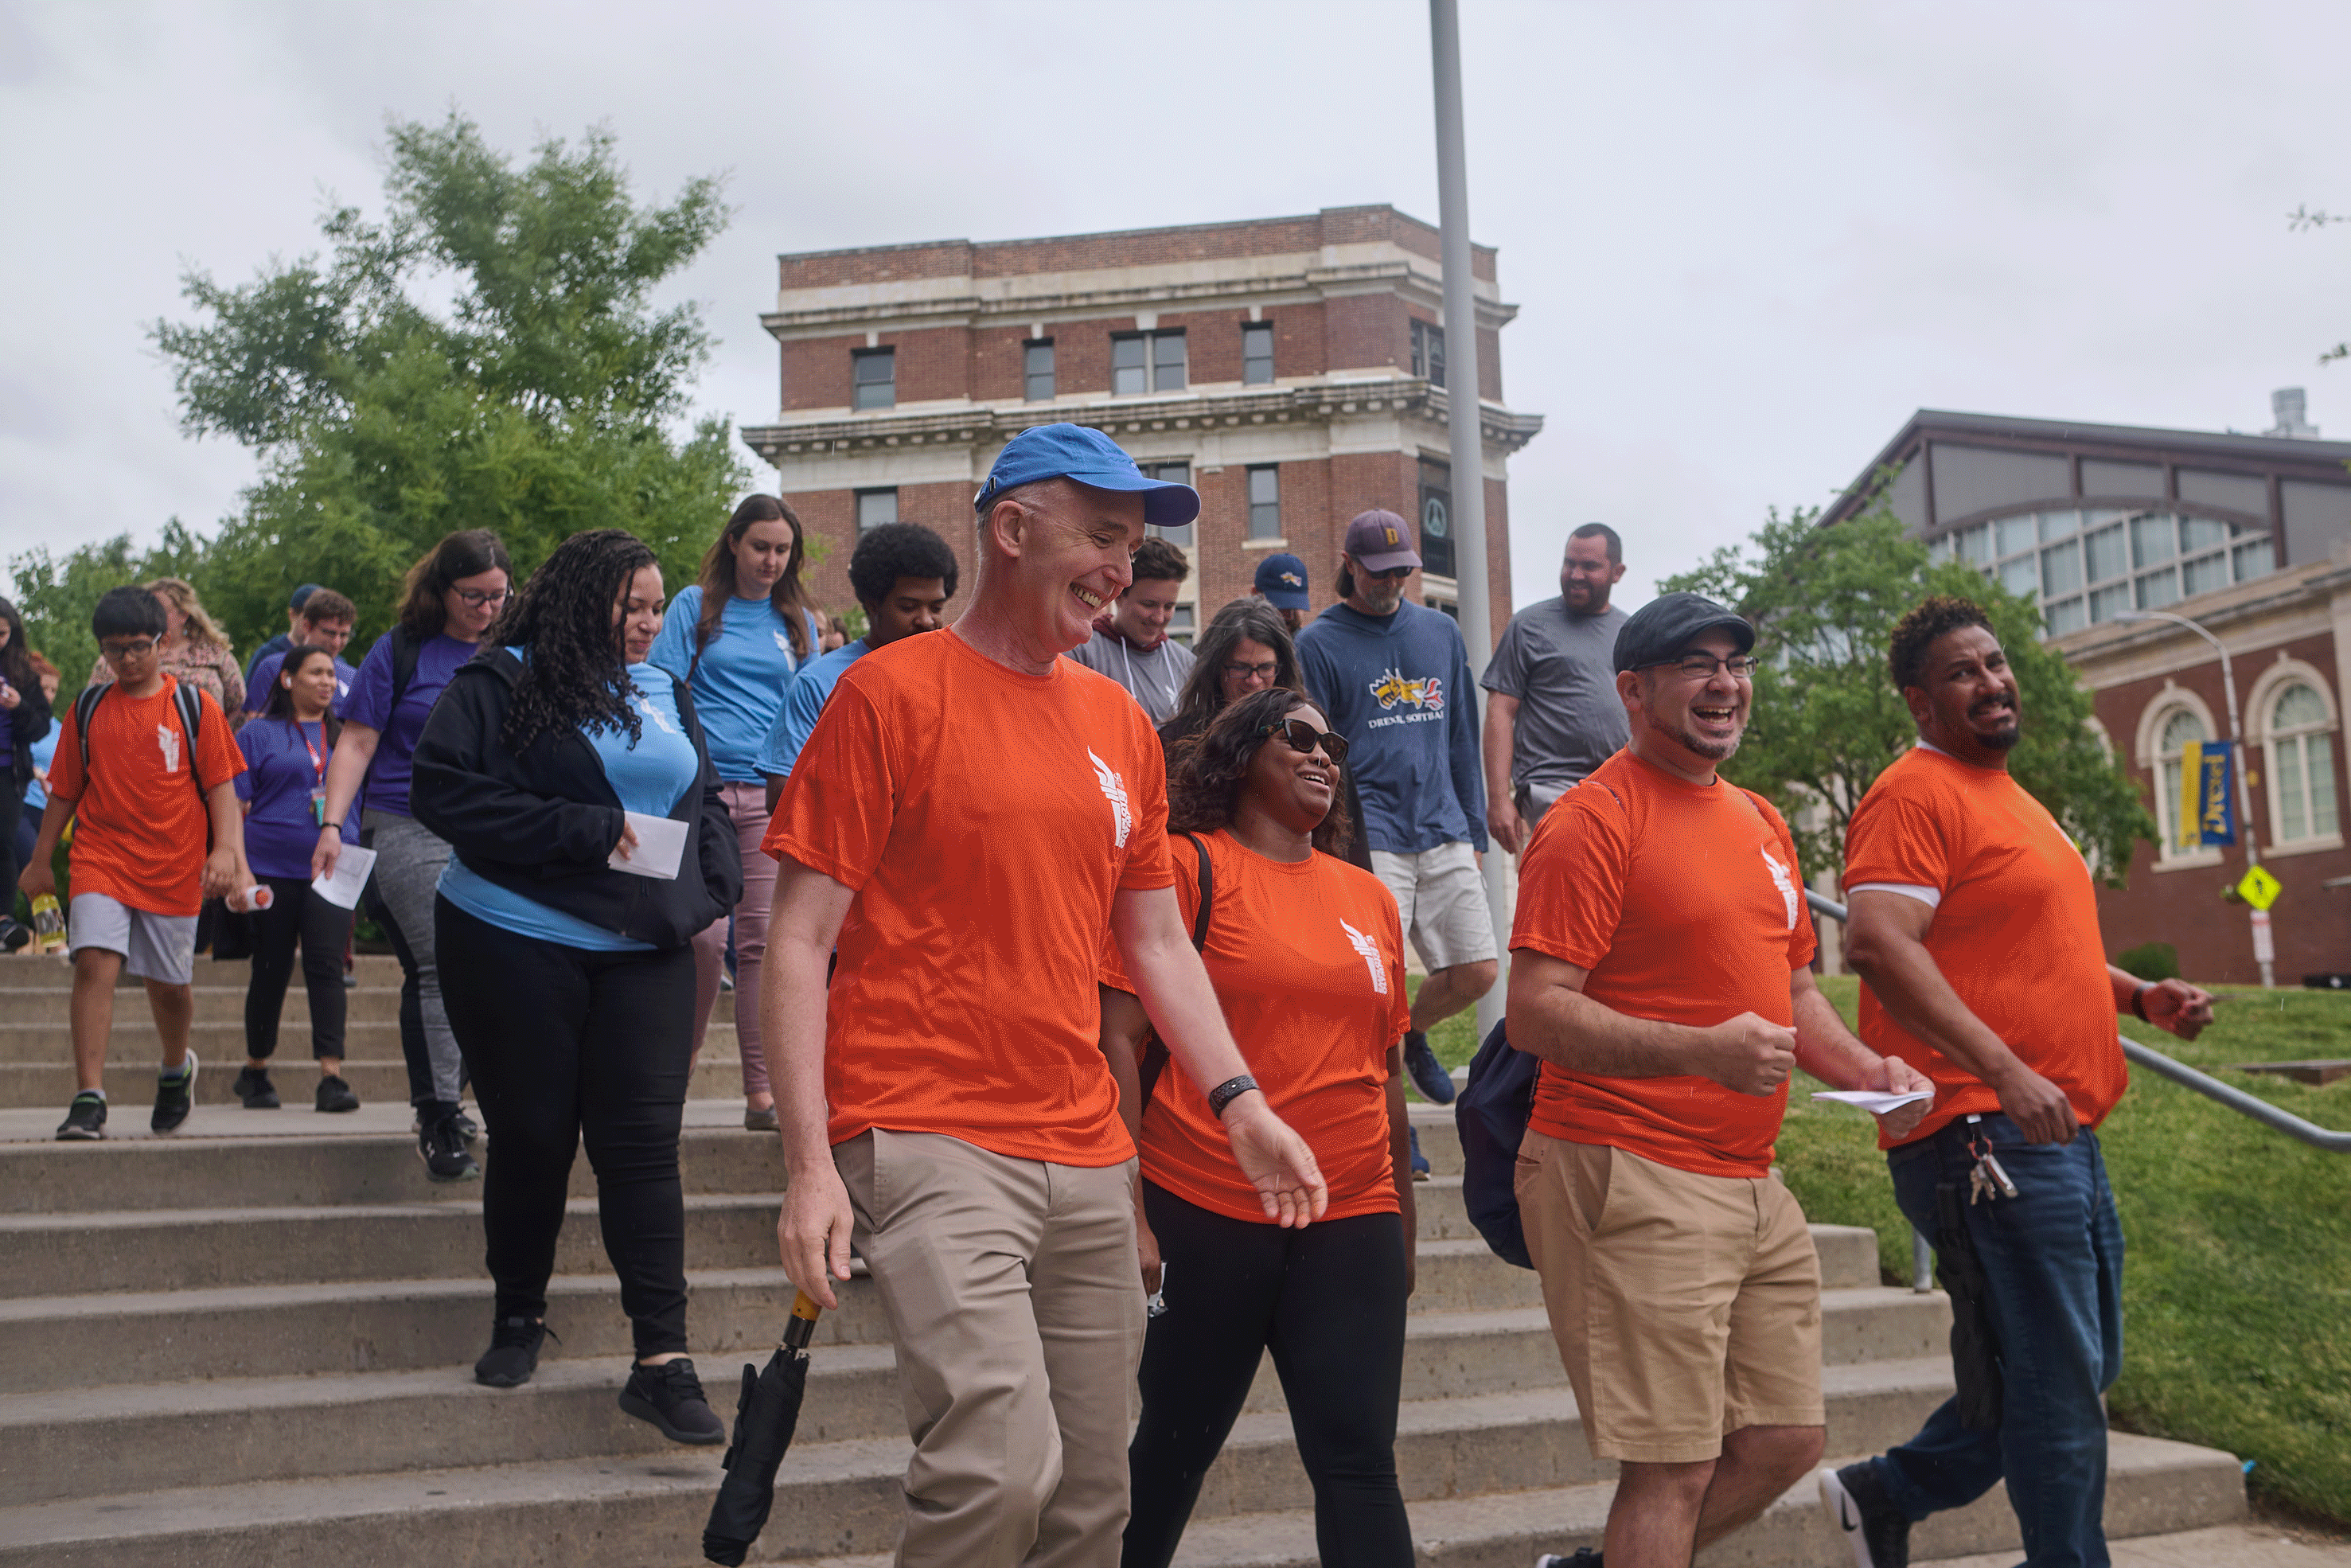 GIf of images of a group of people in orange shirts leading a group down stairs; people playing Baggo on a basketball court; two people playing table tennis; people in purple andornage shirts on a sandf volleyball court oplaying and a woman petting a dog.